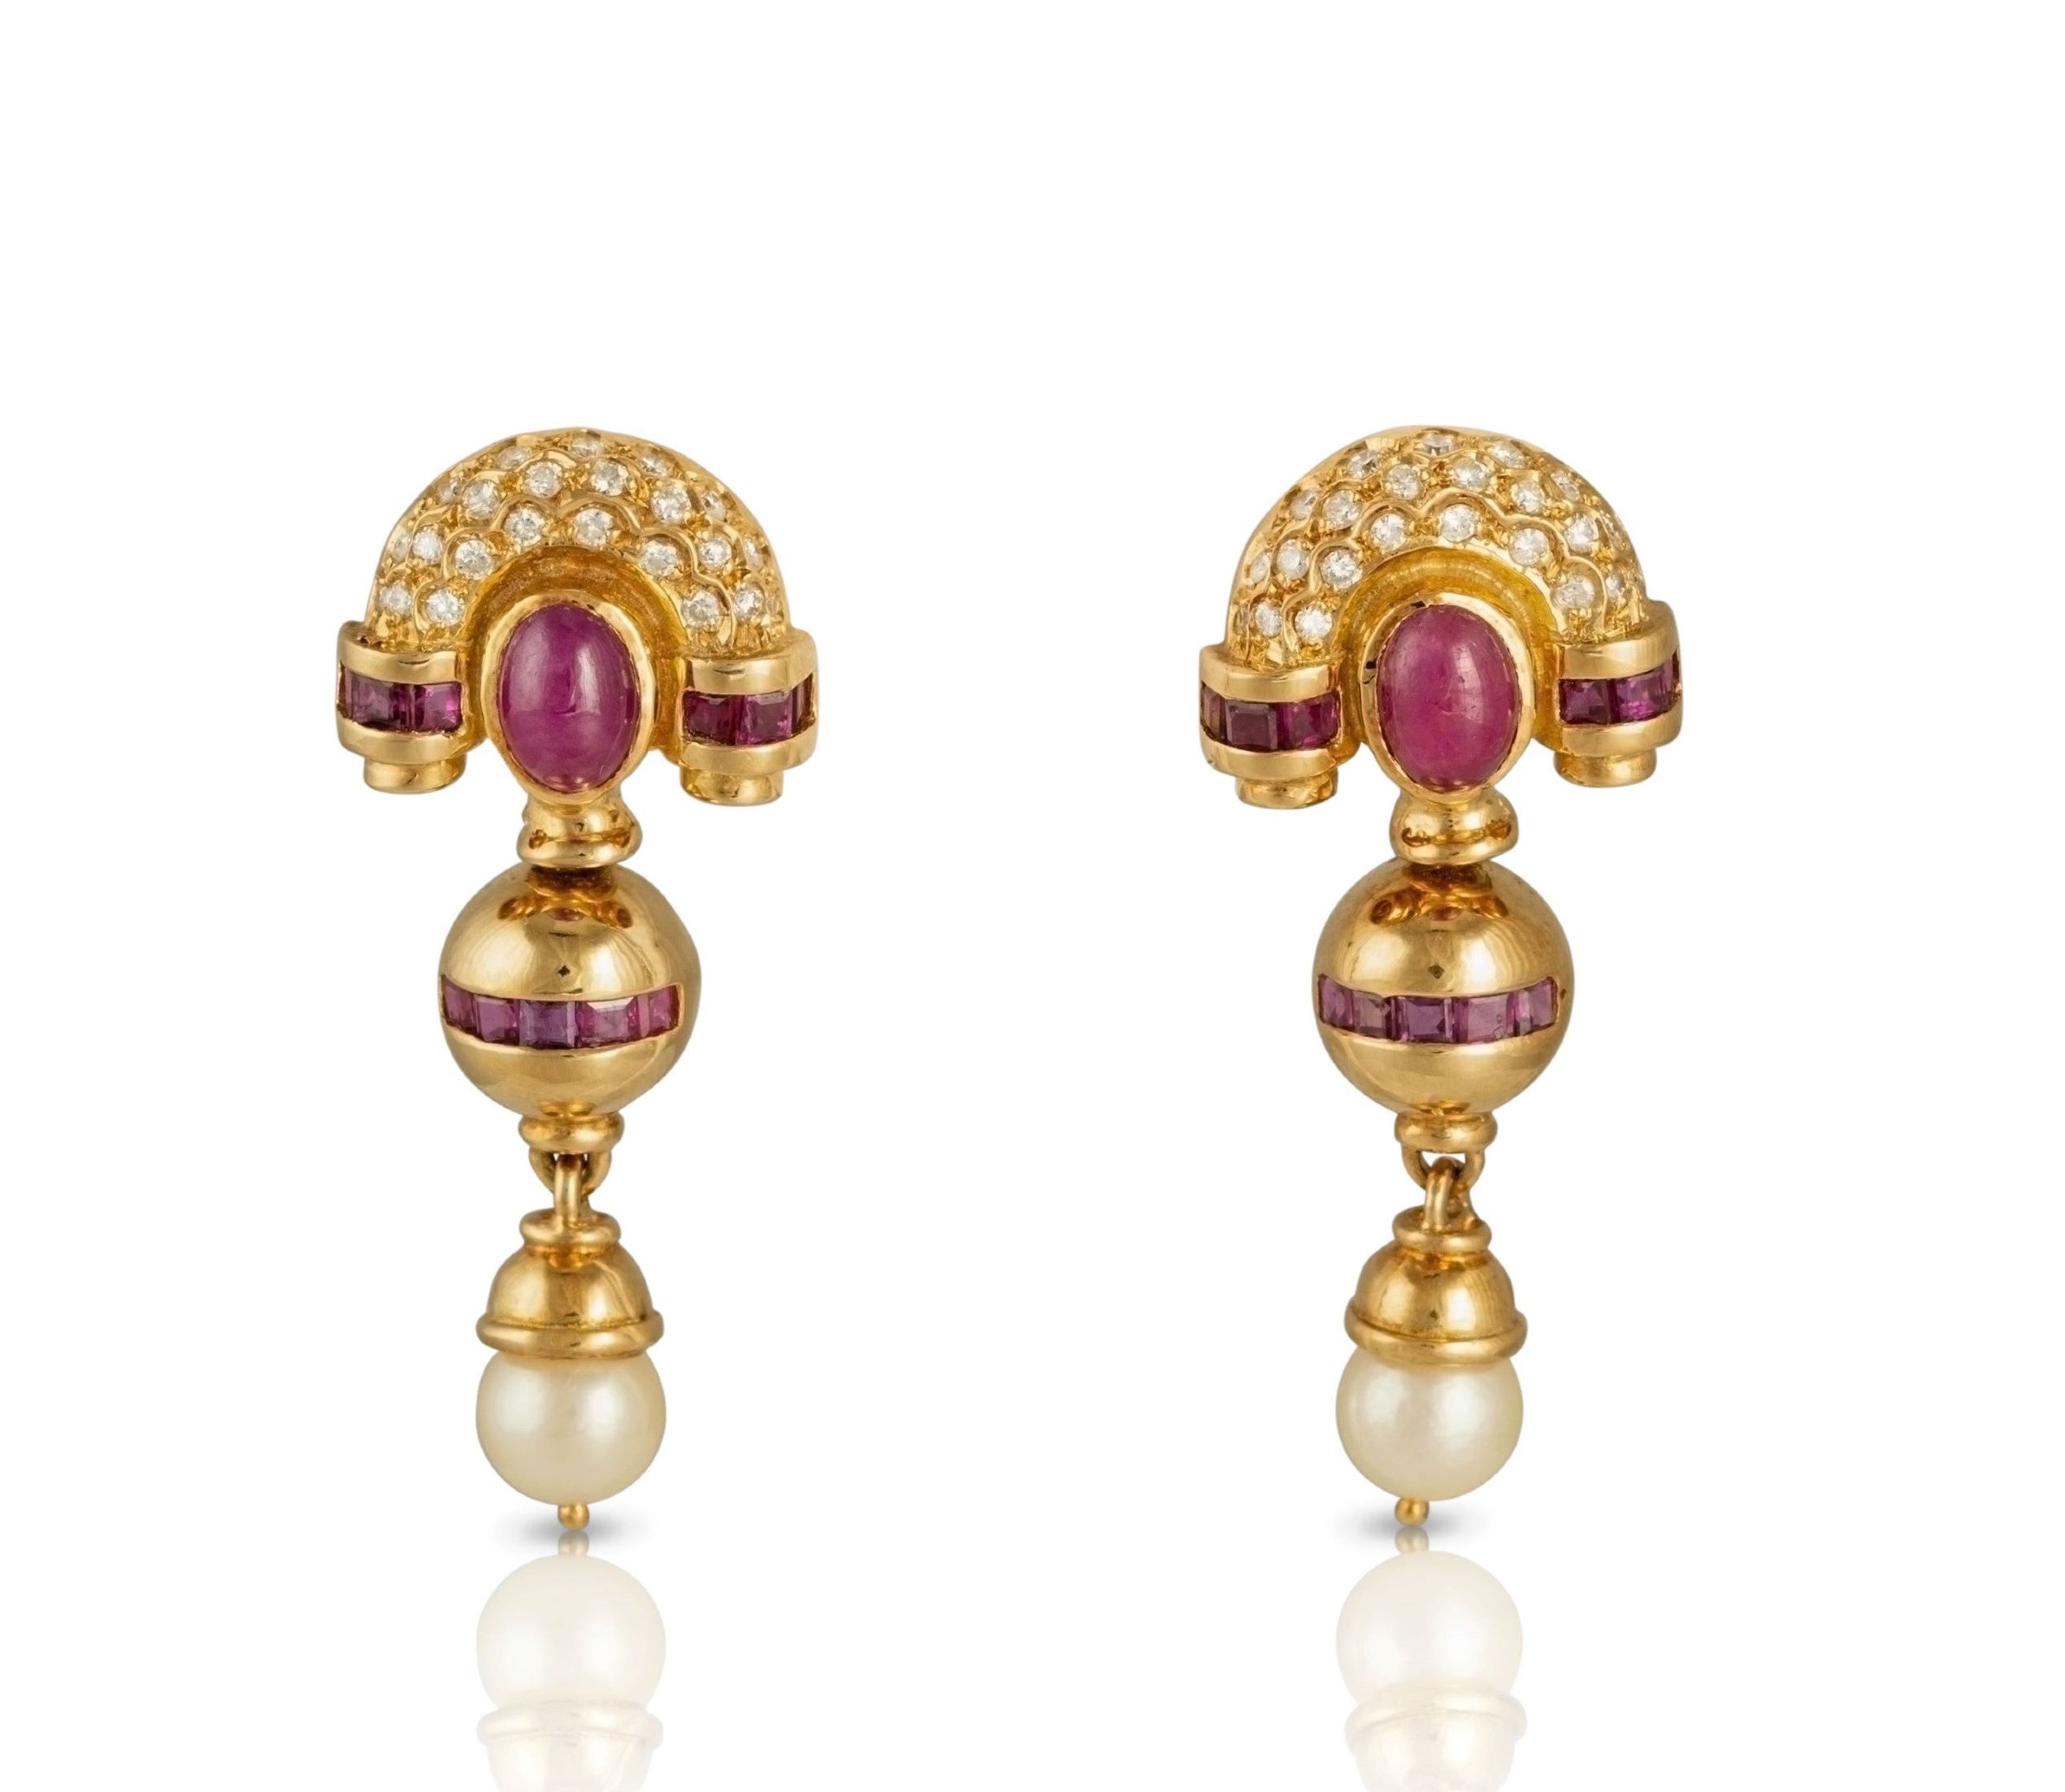 Vintage gold dangle earrings with rubies, diamonds, and cultured pearl drops.